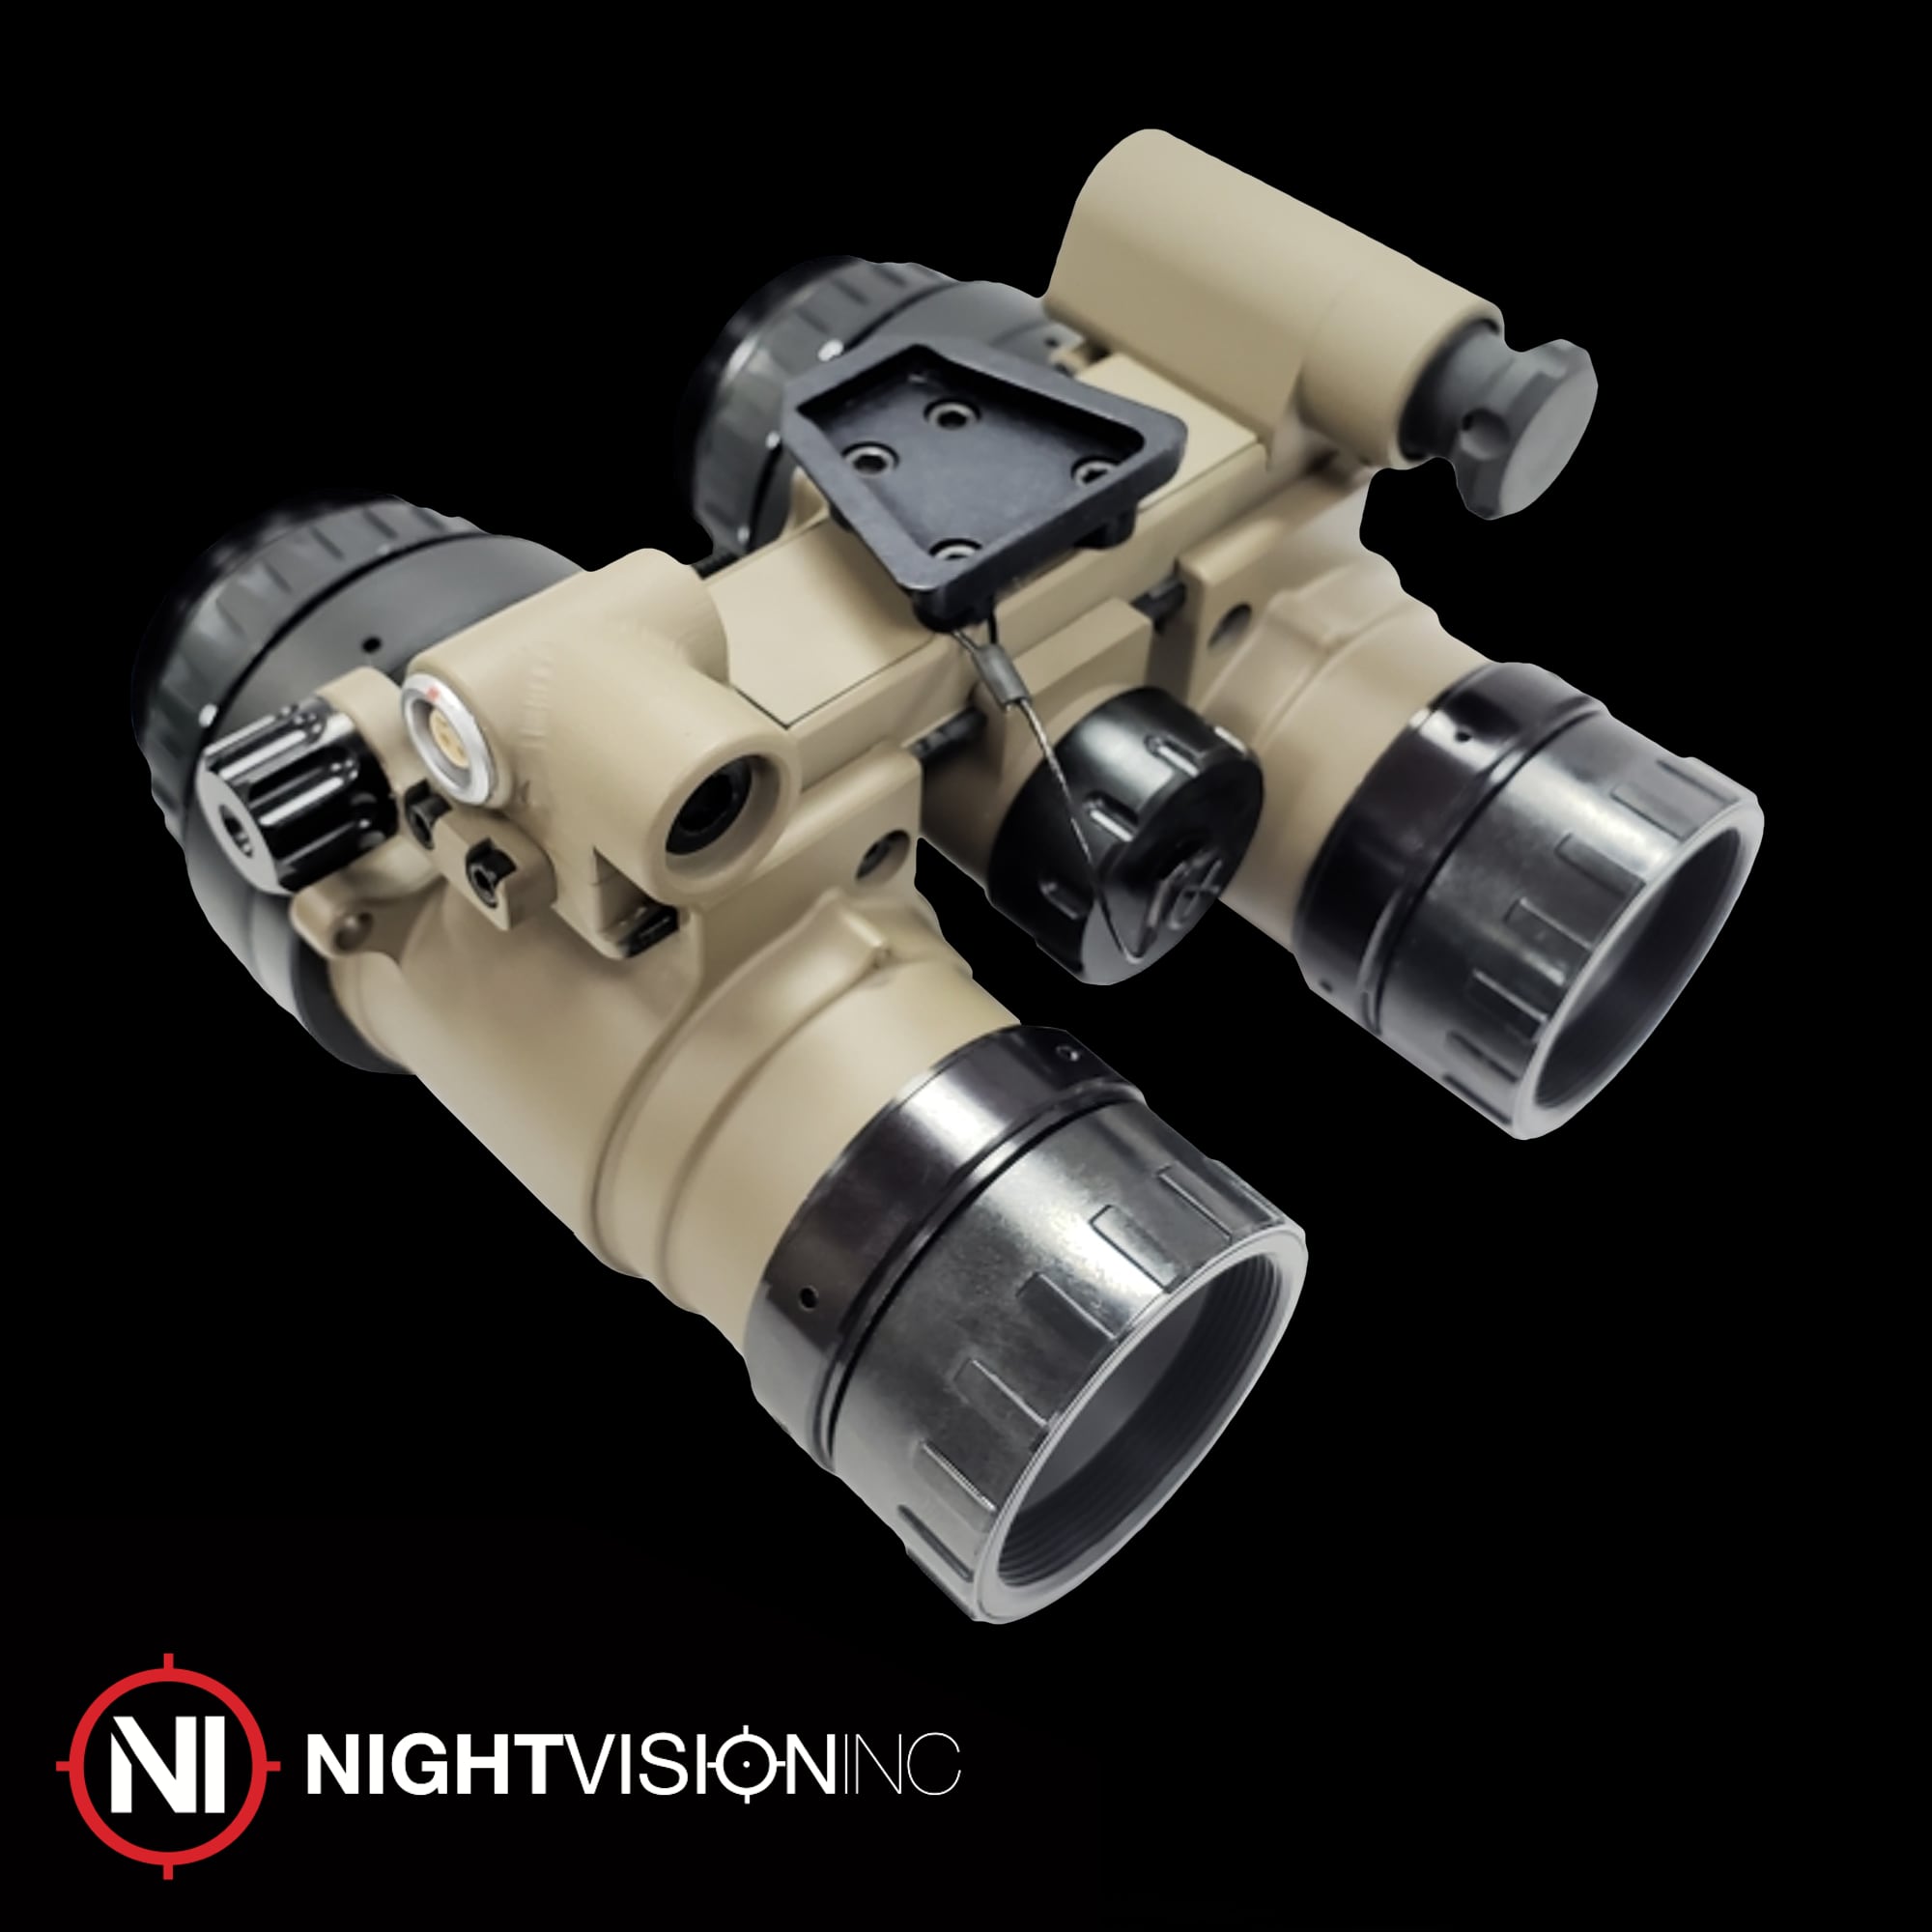 RNVG (Ruggedized Night Vision Goggle) – T.REX ARMS